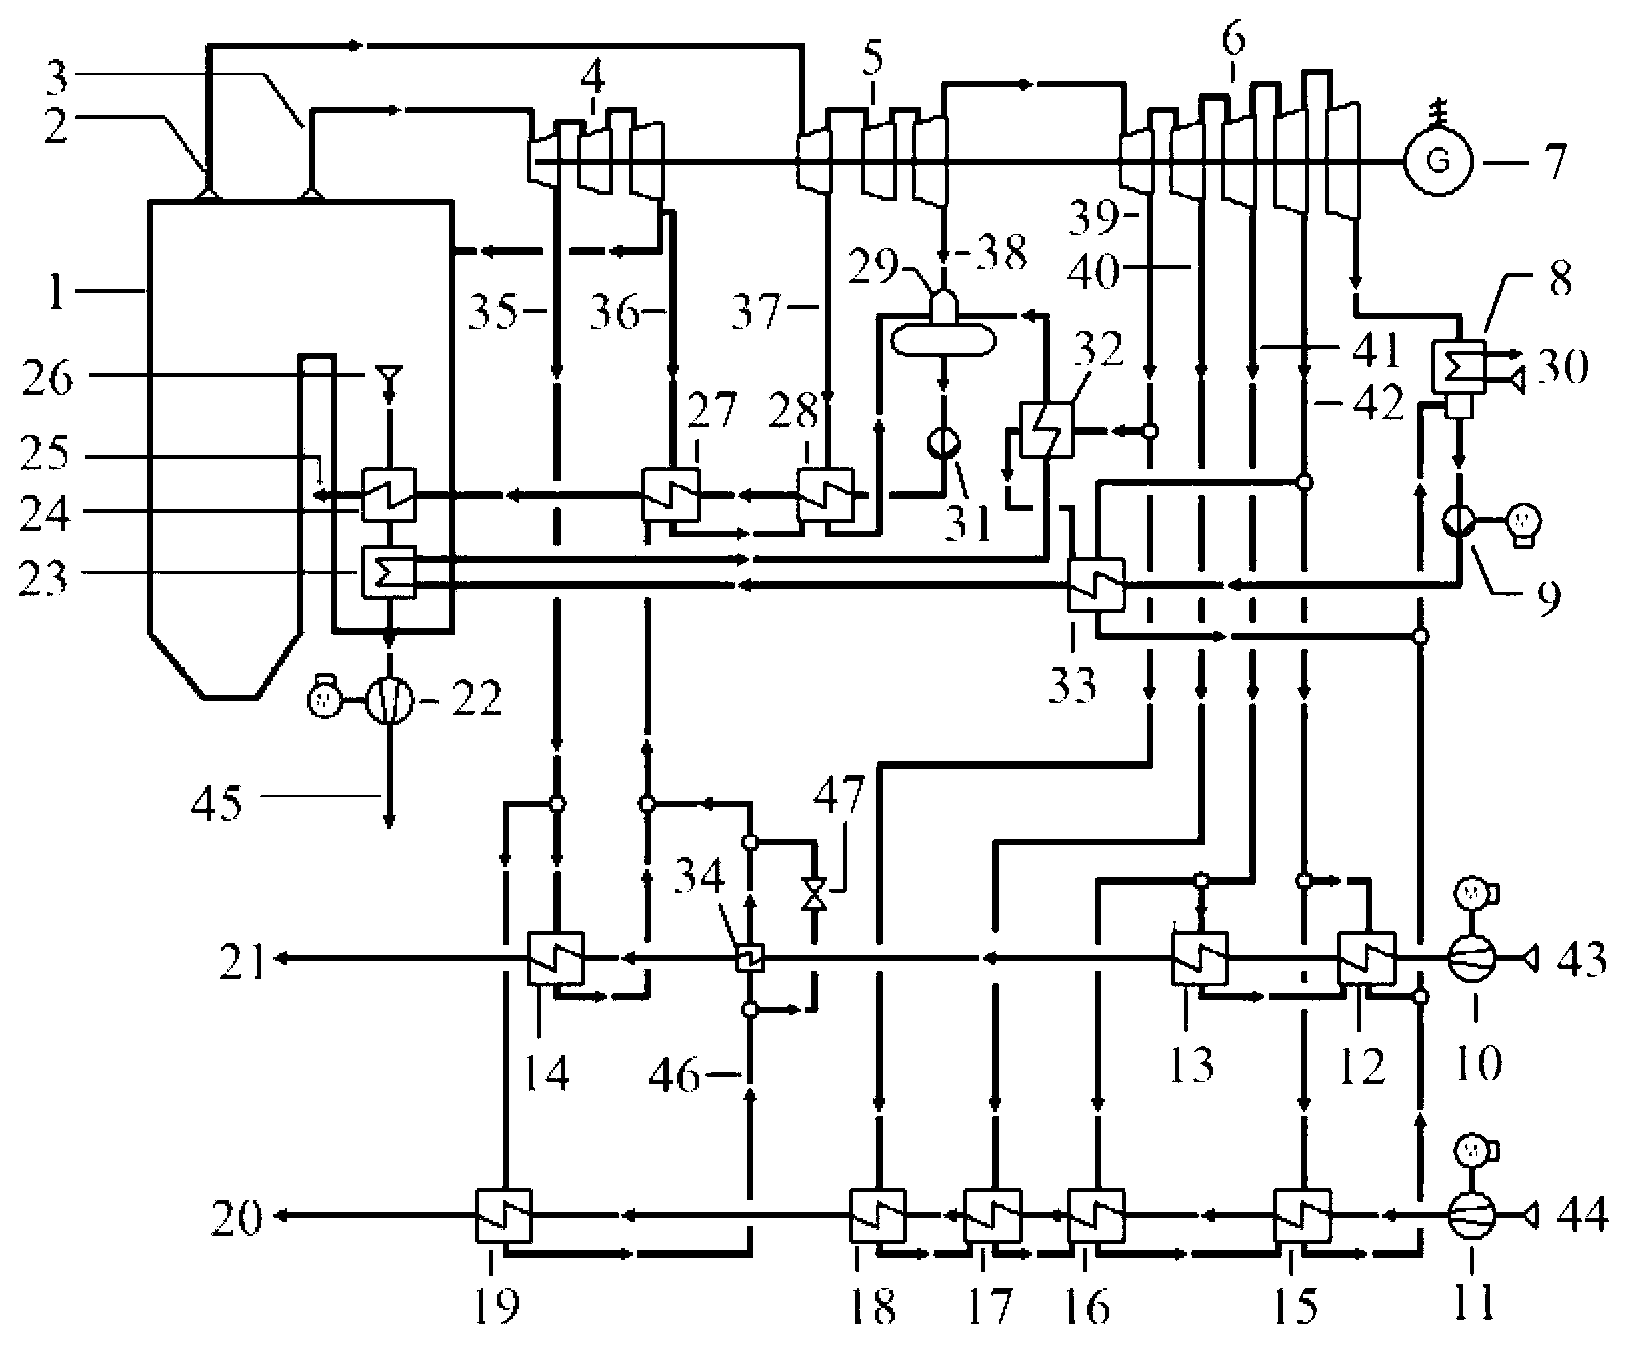 Air preheating system and method performing steam extraction by utilizing steam turbine